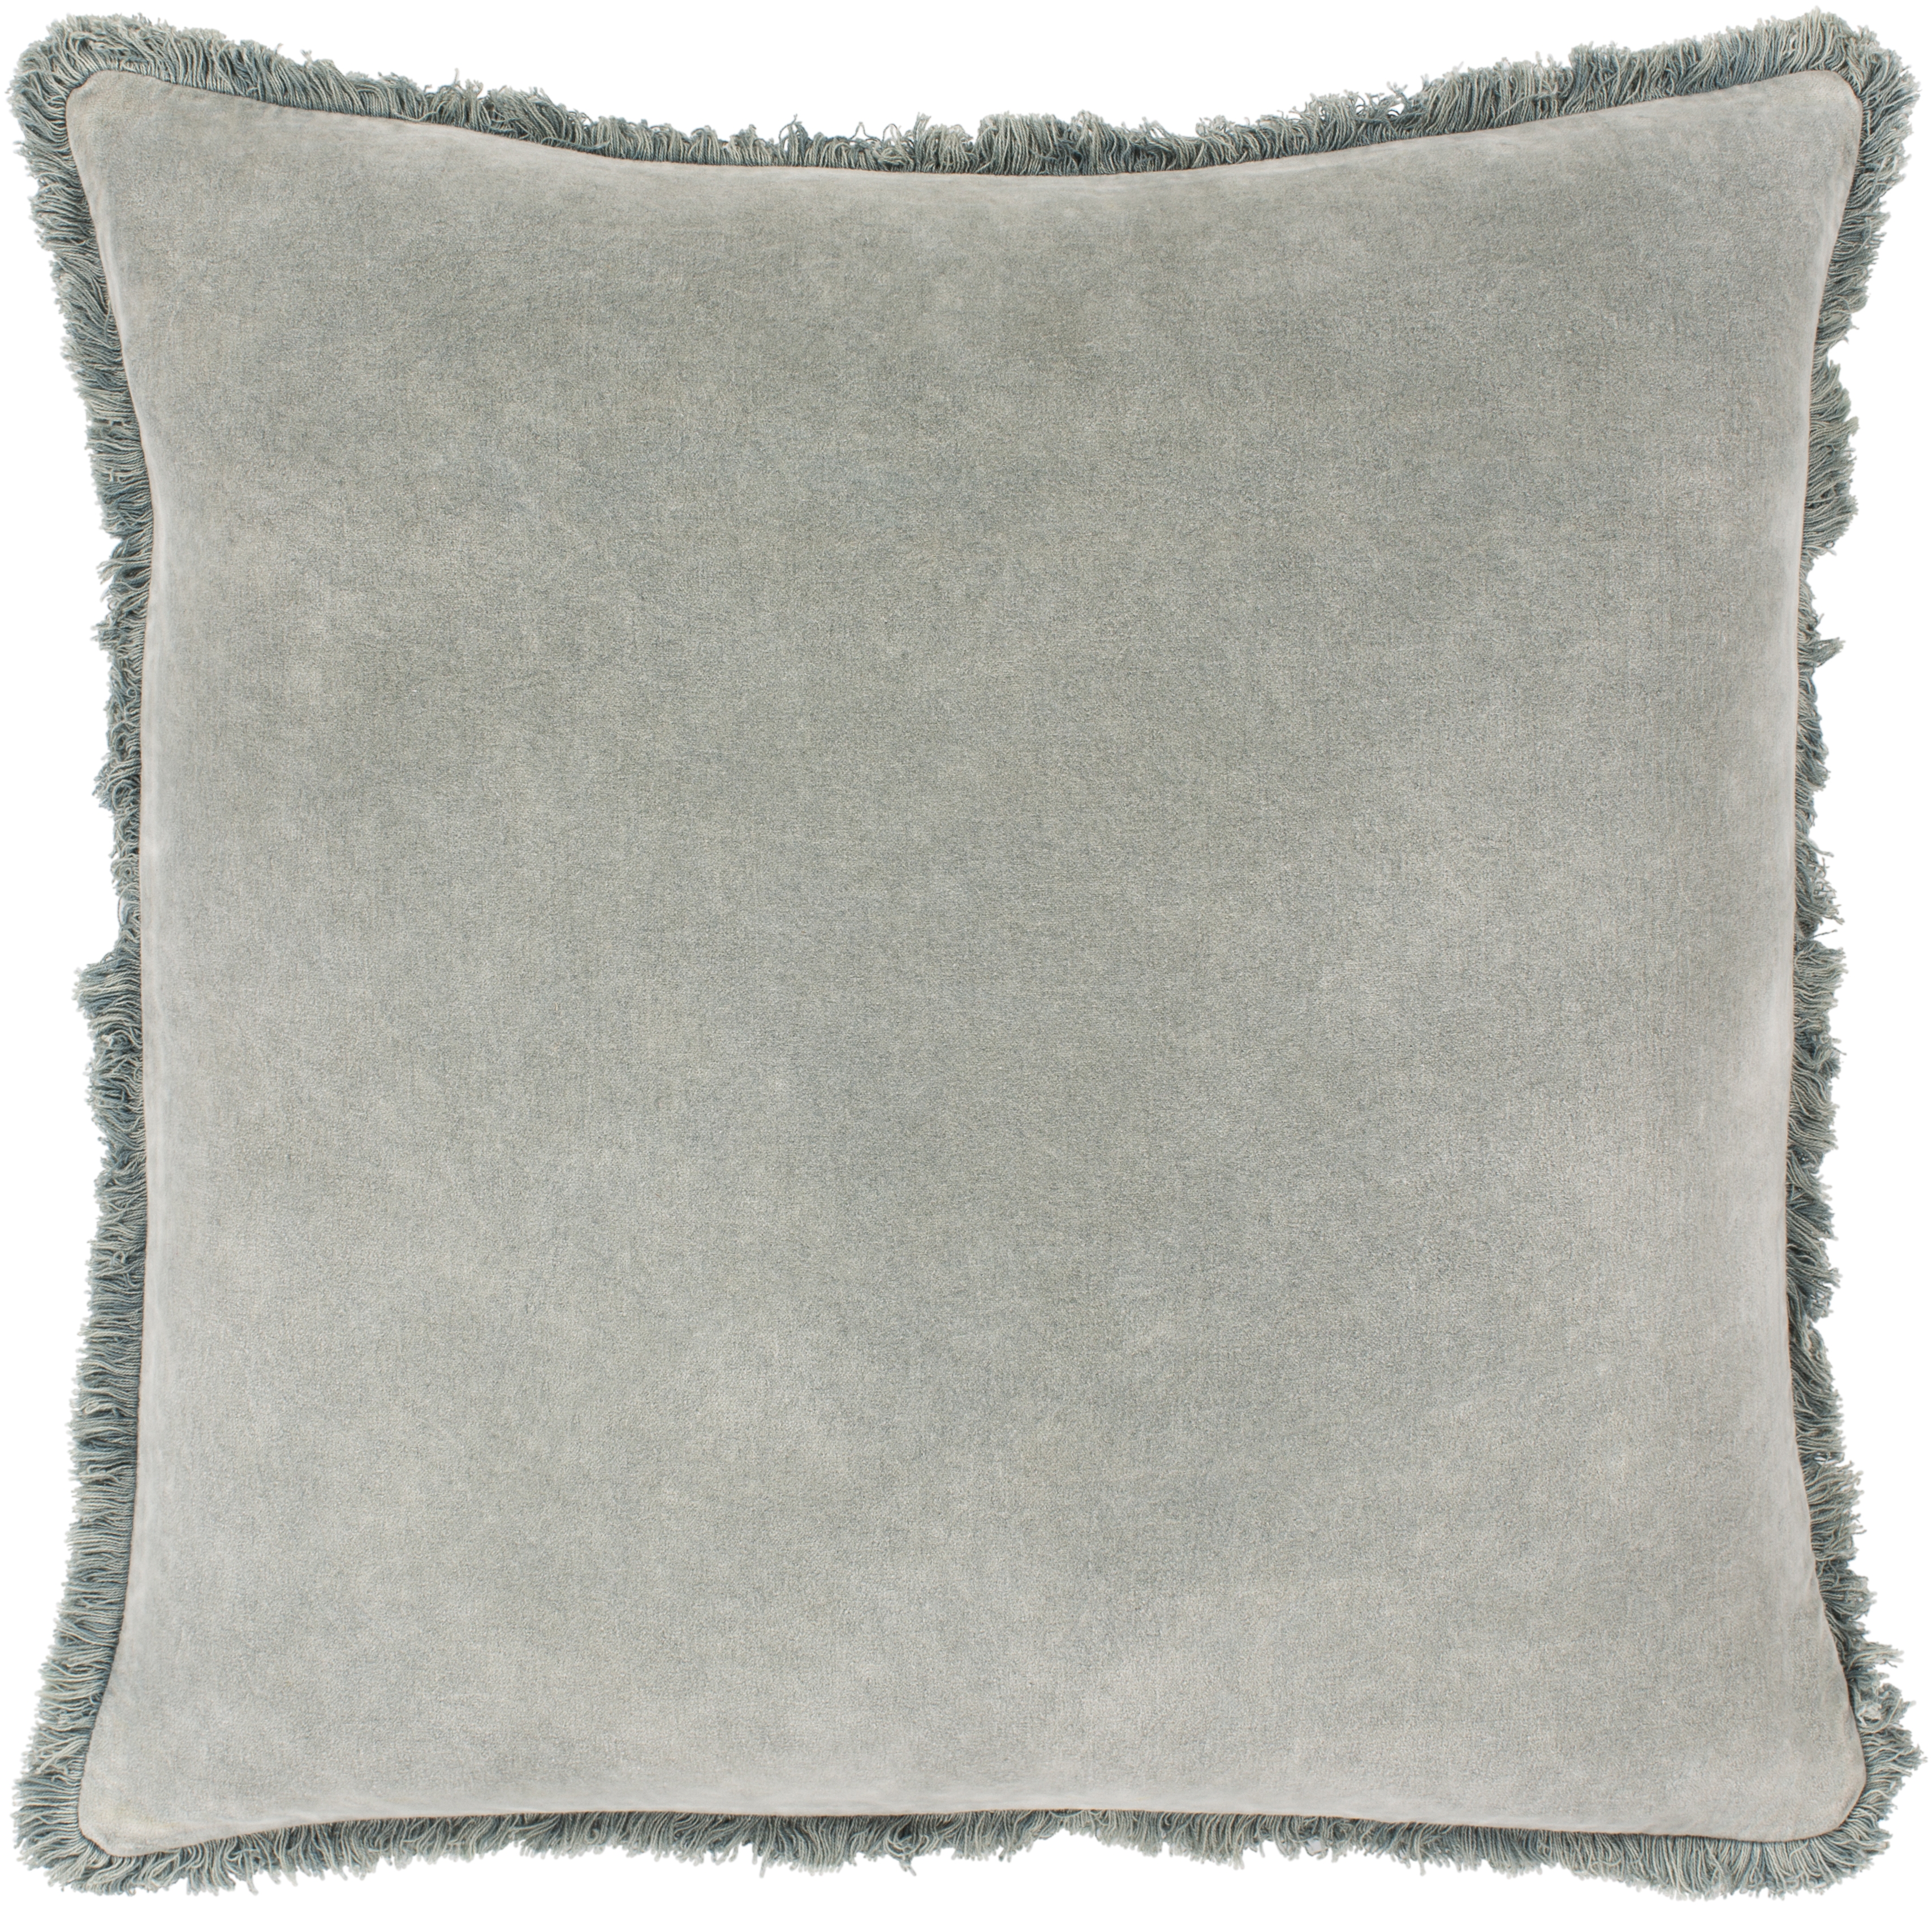 Washed Cotton Velvet Throw Pillow, 20" x 20", with down insert - Image 0